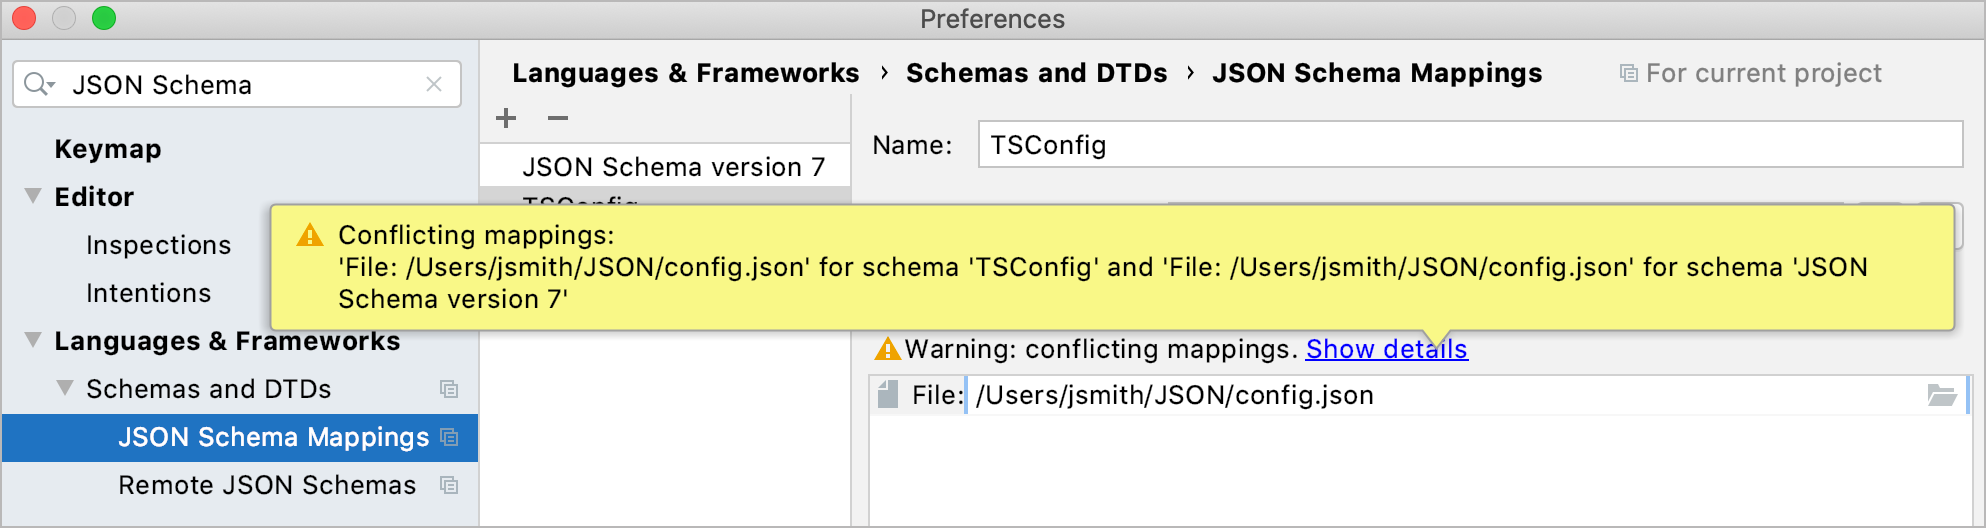 Notification about conflicting schema scopes in Preferences dialog